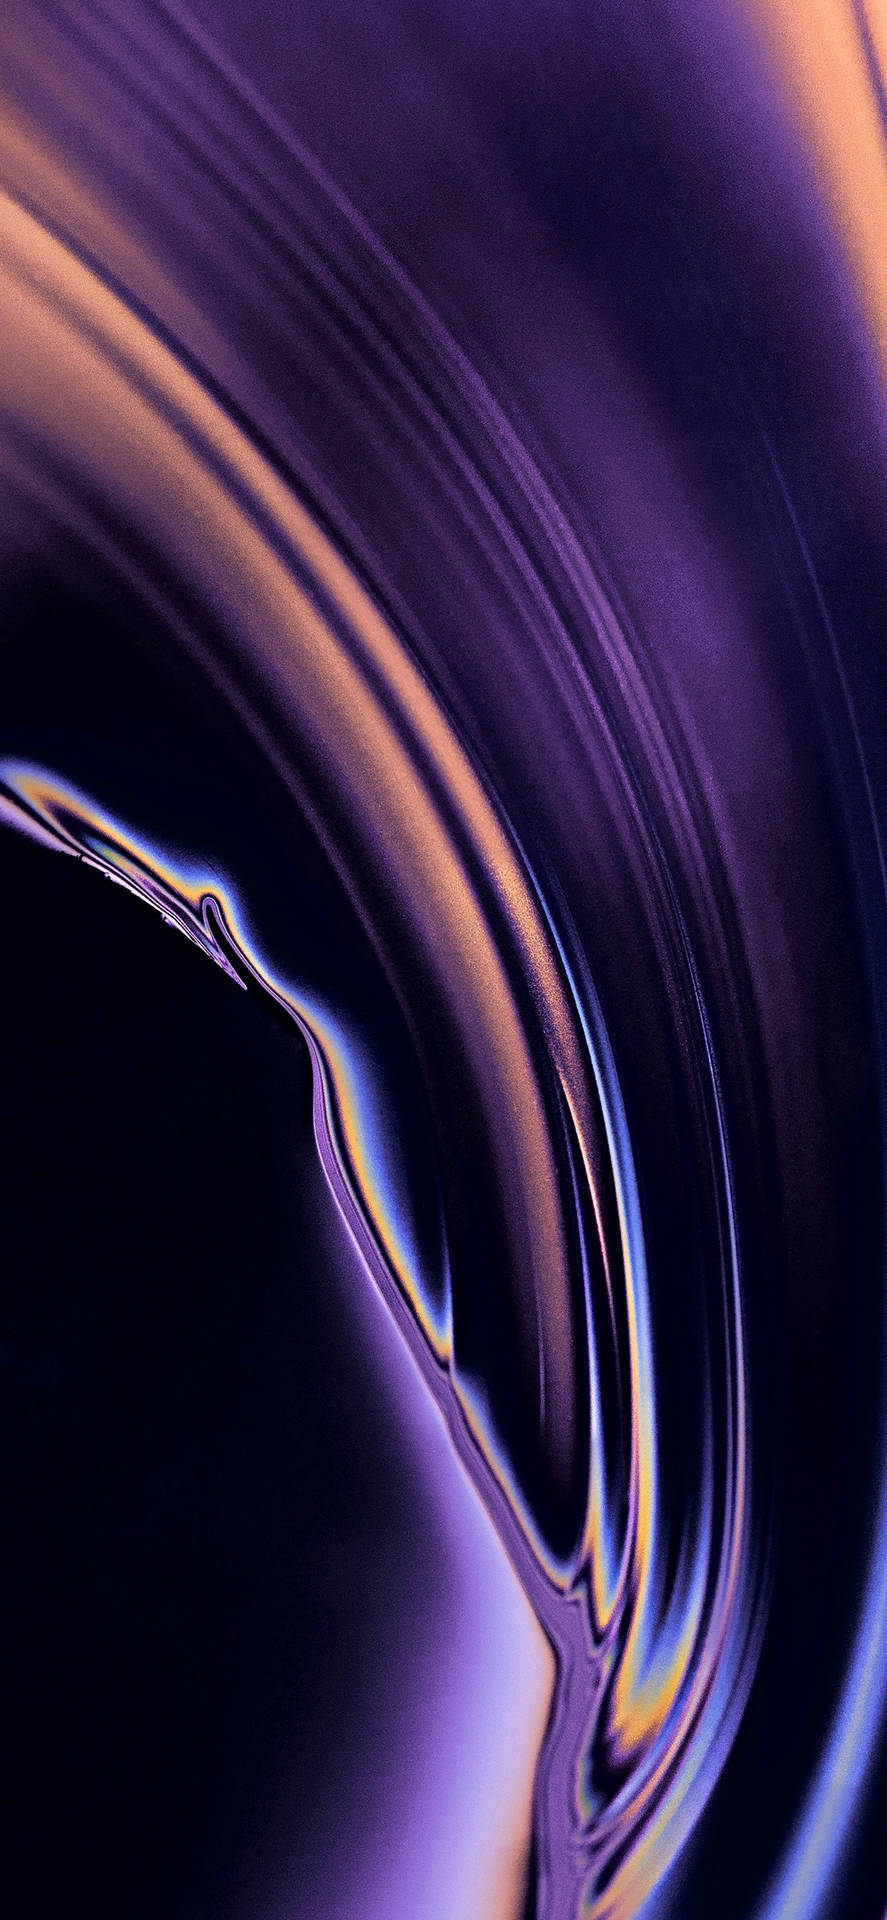 Abstract Iphone Wallpaper Images